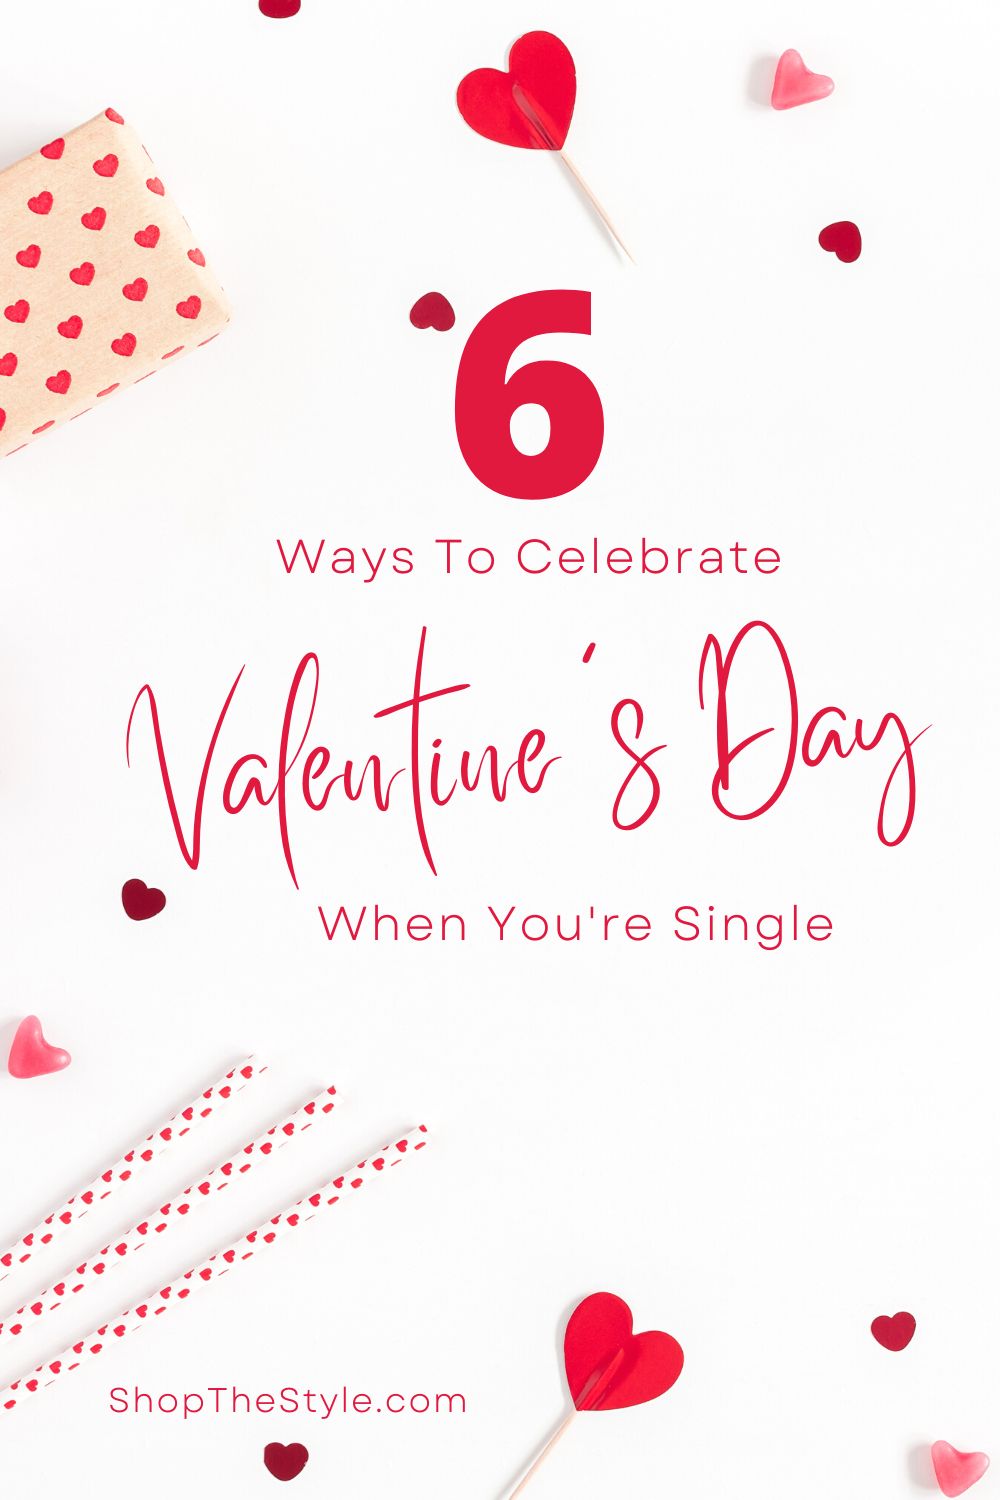 How To Celebrate Valentine's Day When You're Single